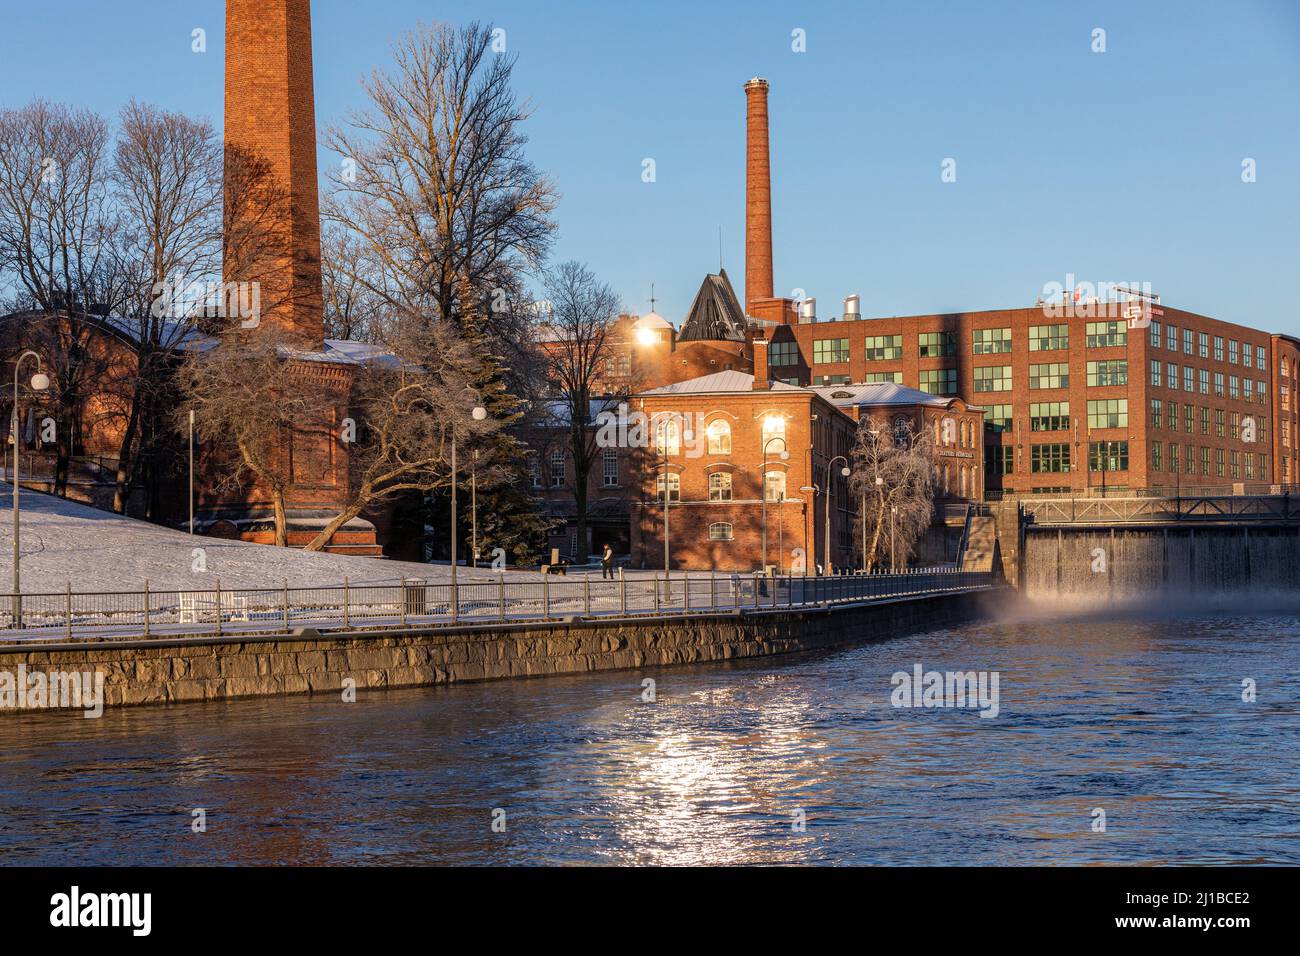 THE WALK OF LOVE LOCKS, TAMMERKOSKI FALLS WITH ITS HYDROELECTRIC PLANT AND THE FRENCKELL THEATER, TAMPERE, FINLAND, EUROPE Stock Photo